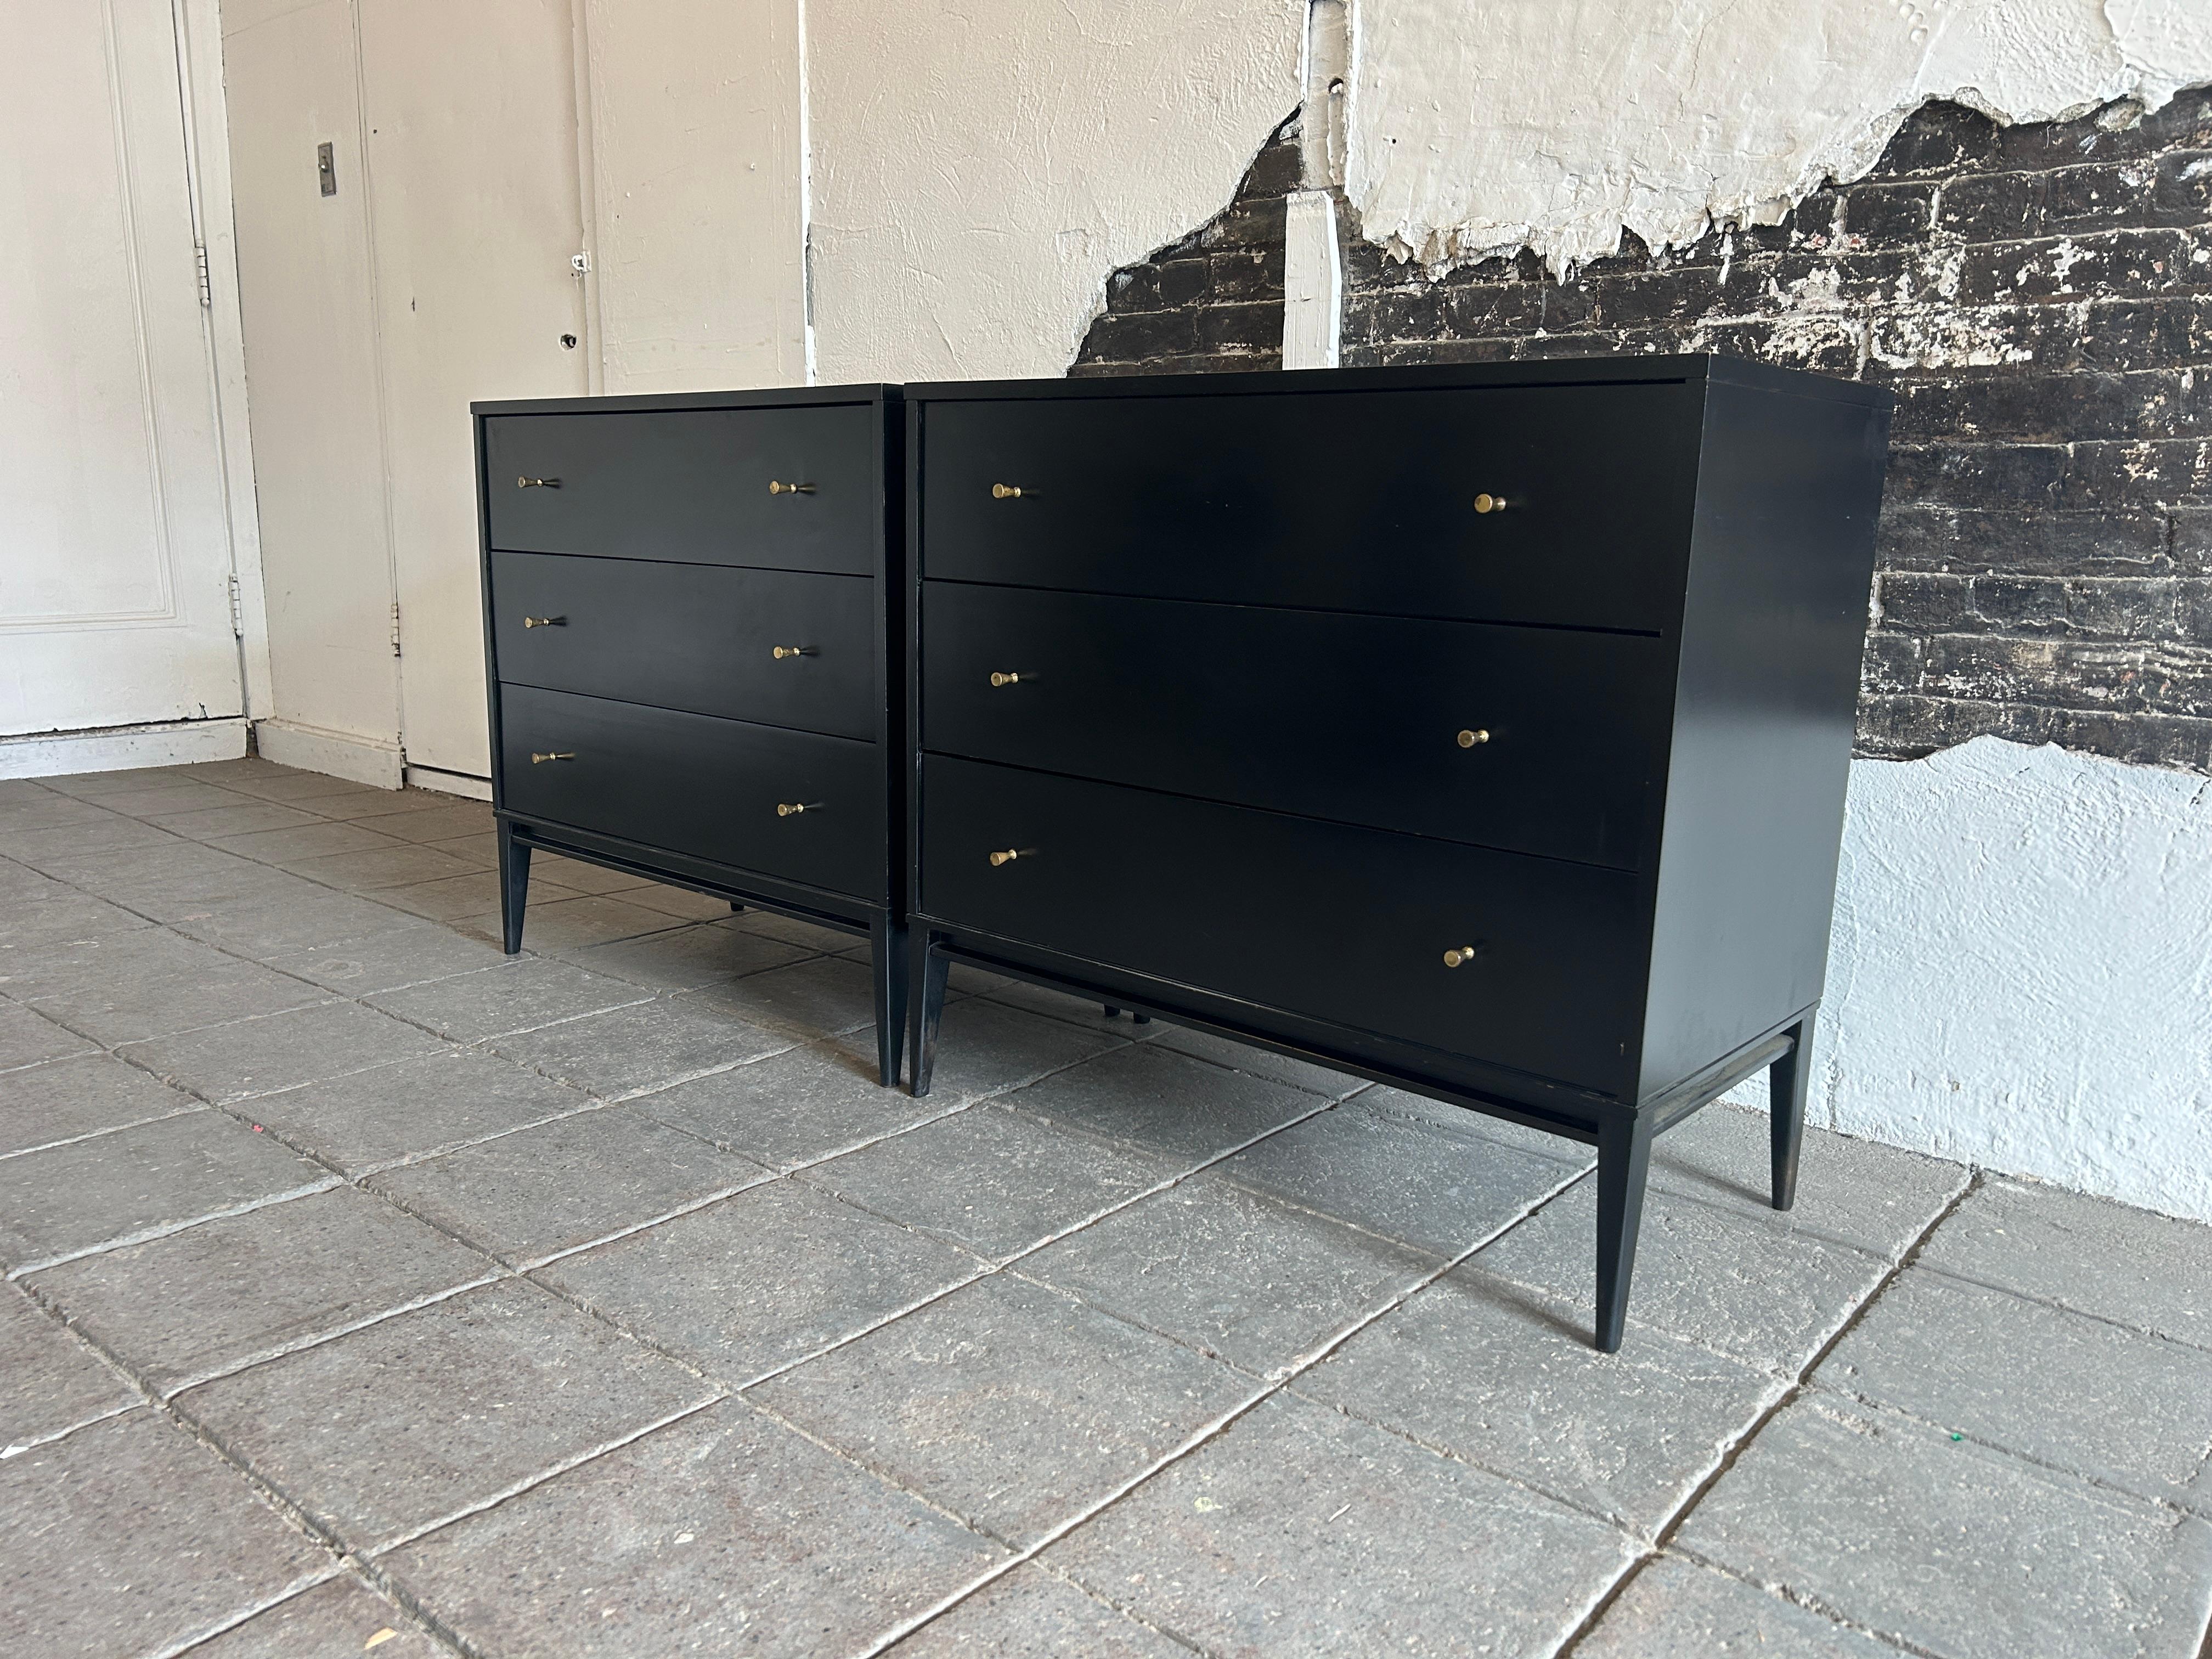 Pair of Mid-Century Modern black lacquer three-drawer dresser by Paul McCobb for Winchendon Furniture Company. Part of the Planner Group. Labeled. Beautiful original black lacquer with original brass knobs with patina. Located in NYC.

This